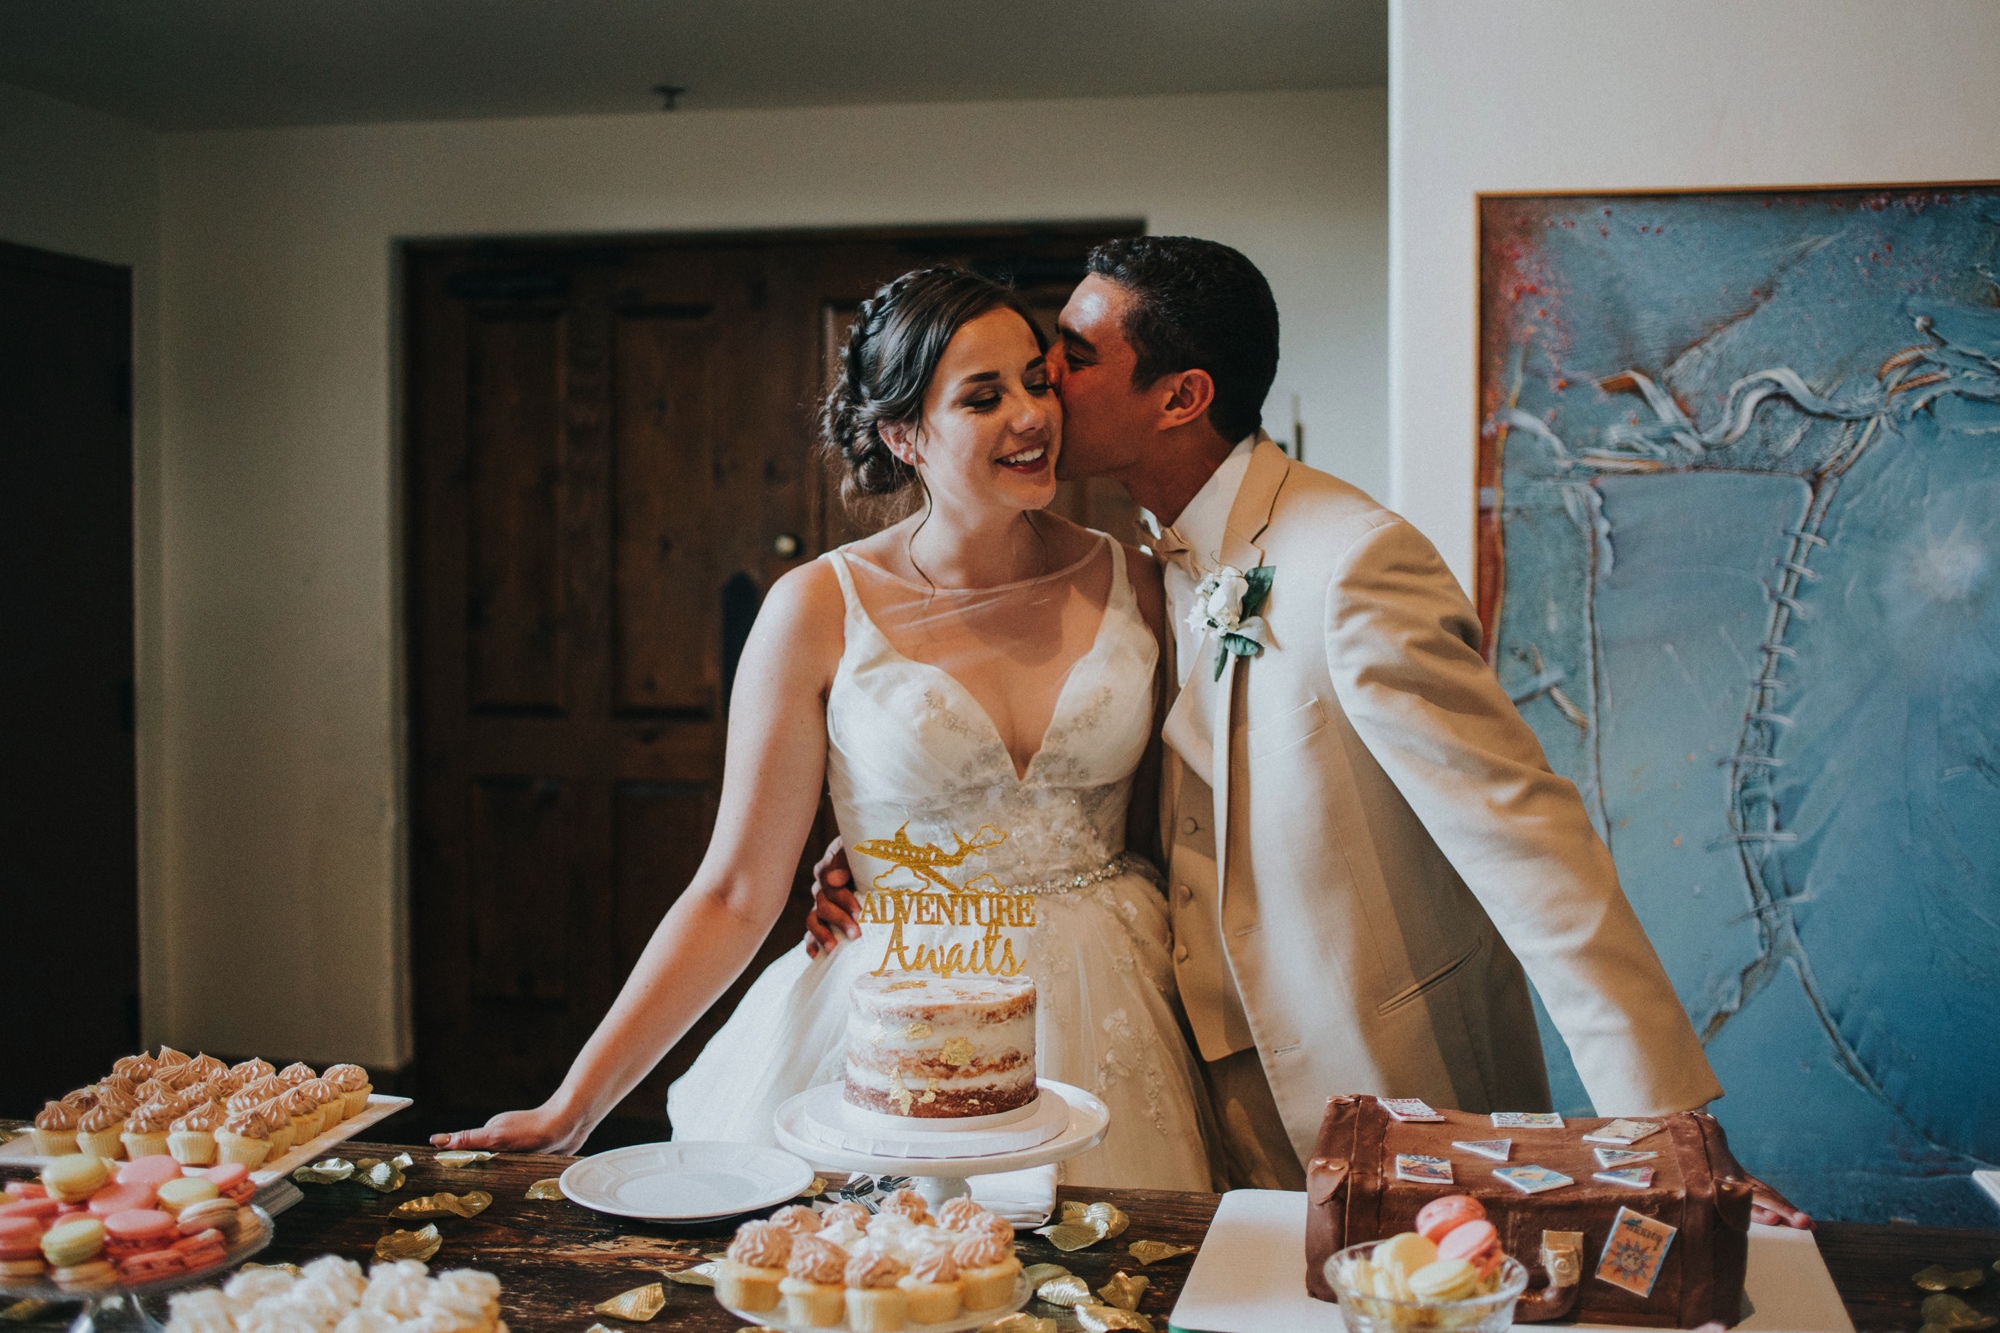  Katie and Frankie’s wedding was what Santa Fe summer wedding dreams are made of! They had a gorgeous catholic wedding ceremony at the Cristo Rey Catholic Church in Santa Fe, New Mexico followed by a fabulous travel-themed wedding reception at La Pos